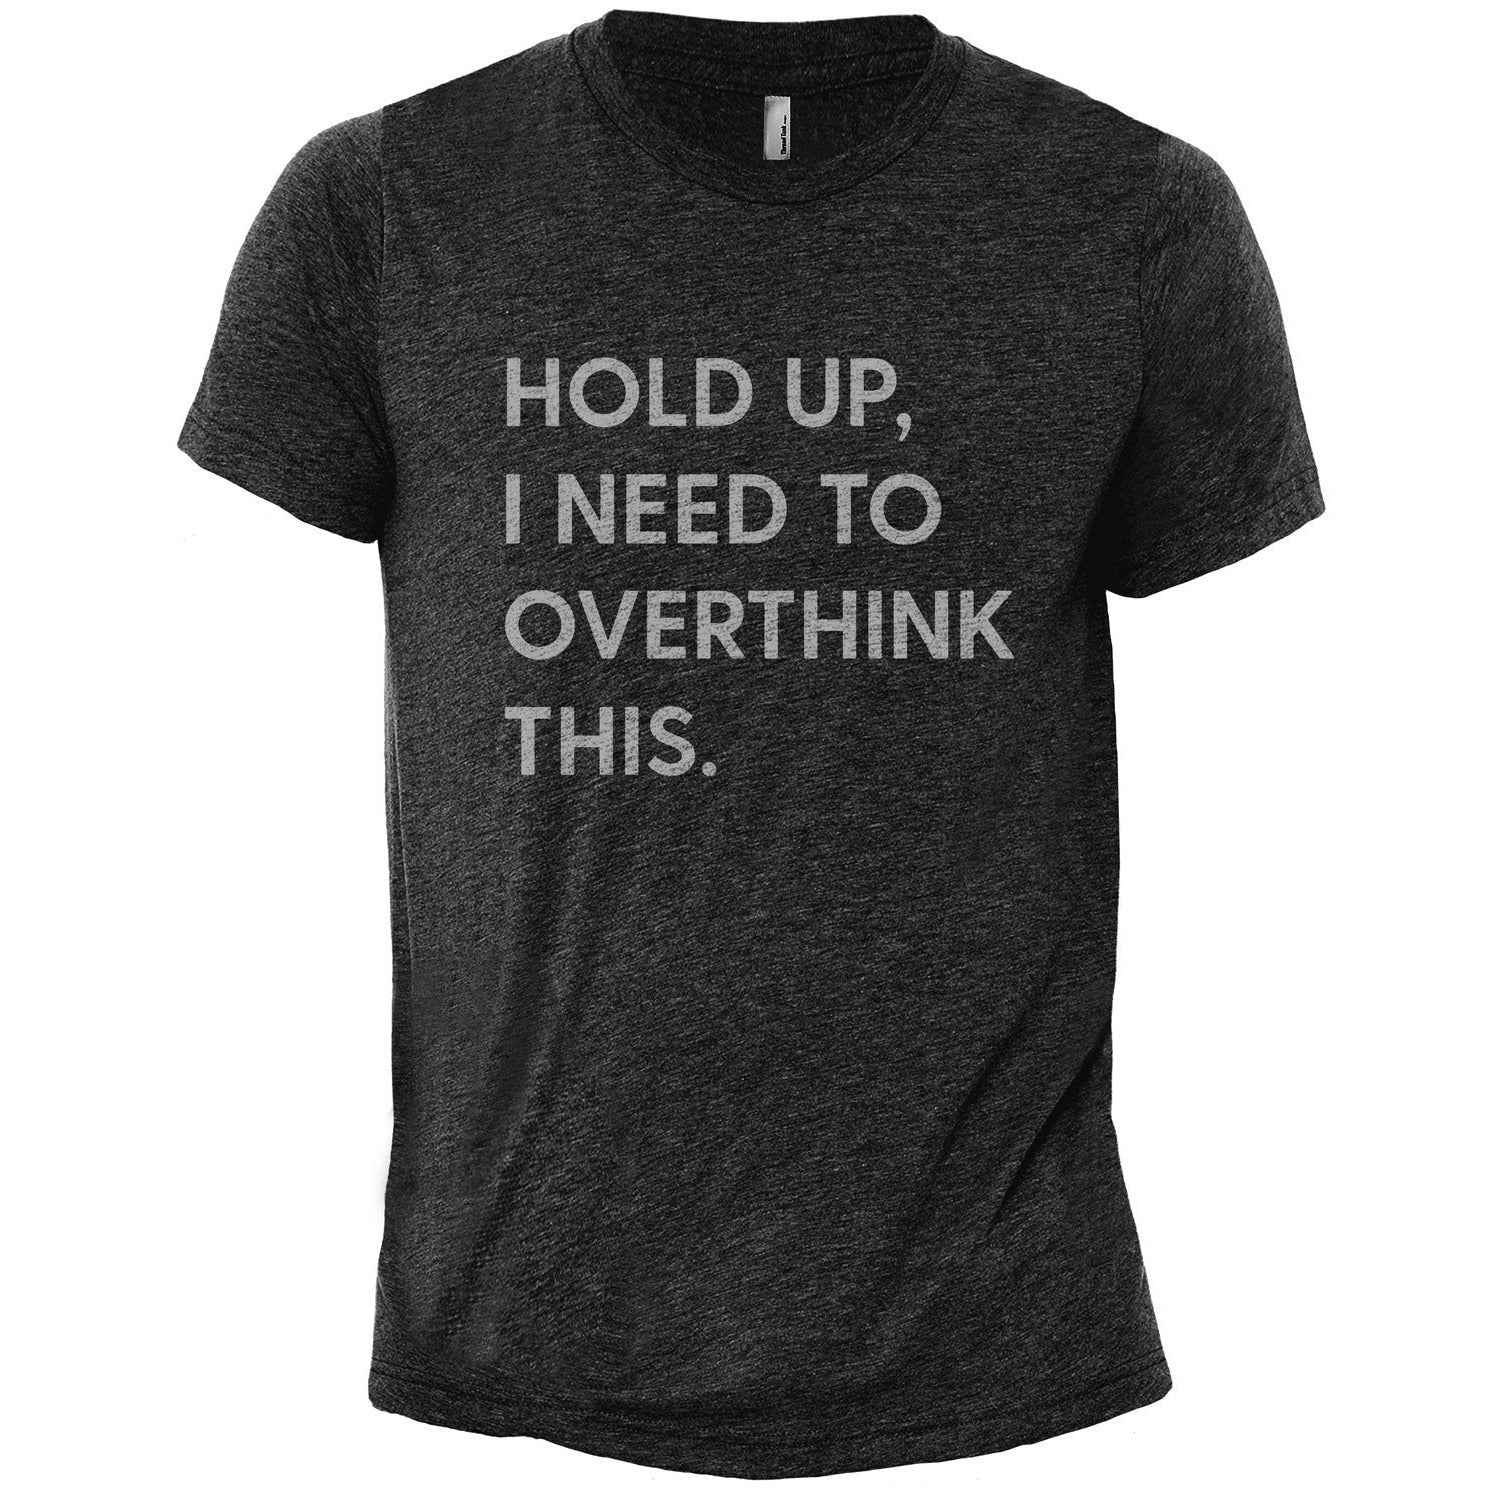 Hold Up, I Need To Rethink This Charcoal Printed Graphic Men's Crew T-Shirt Tee